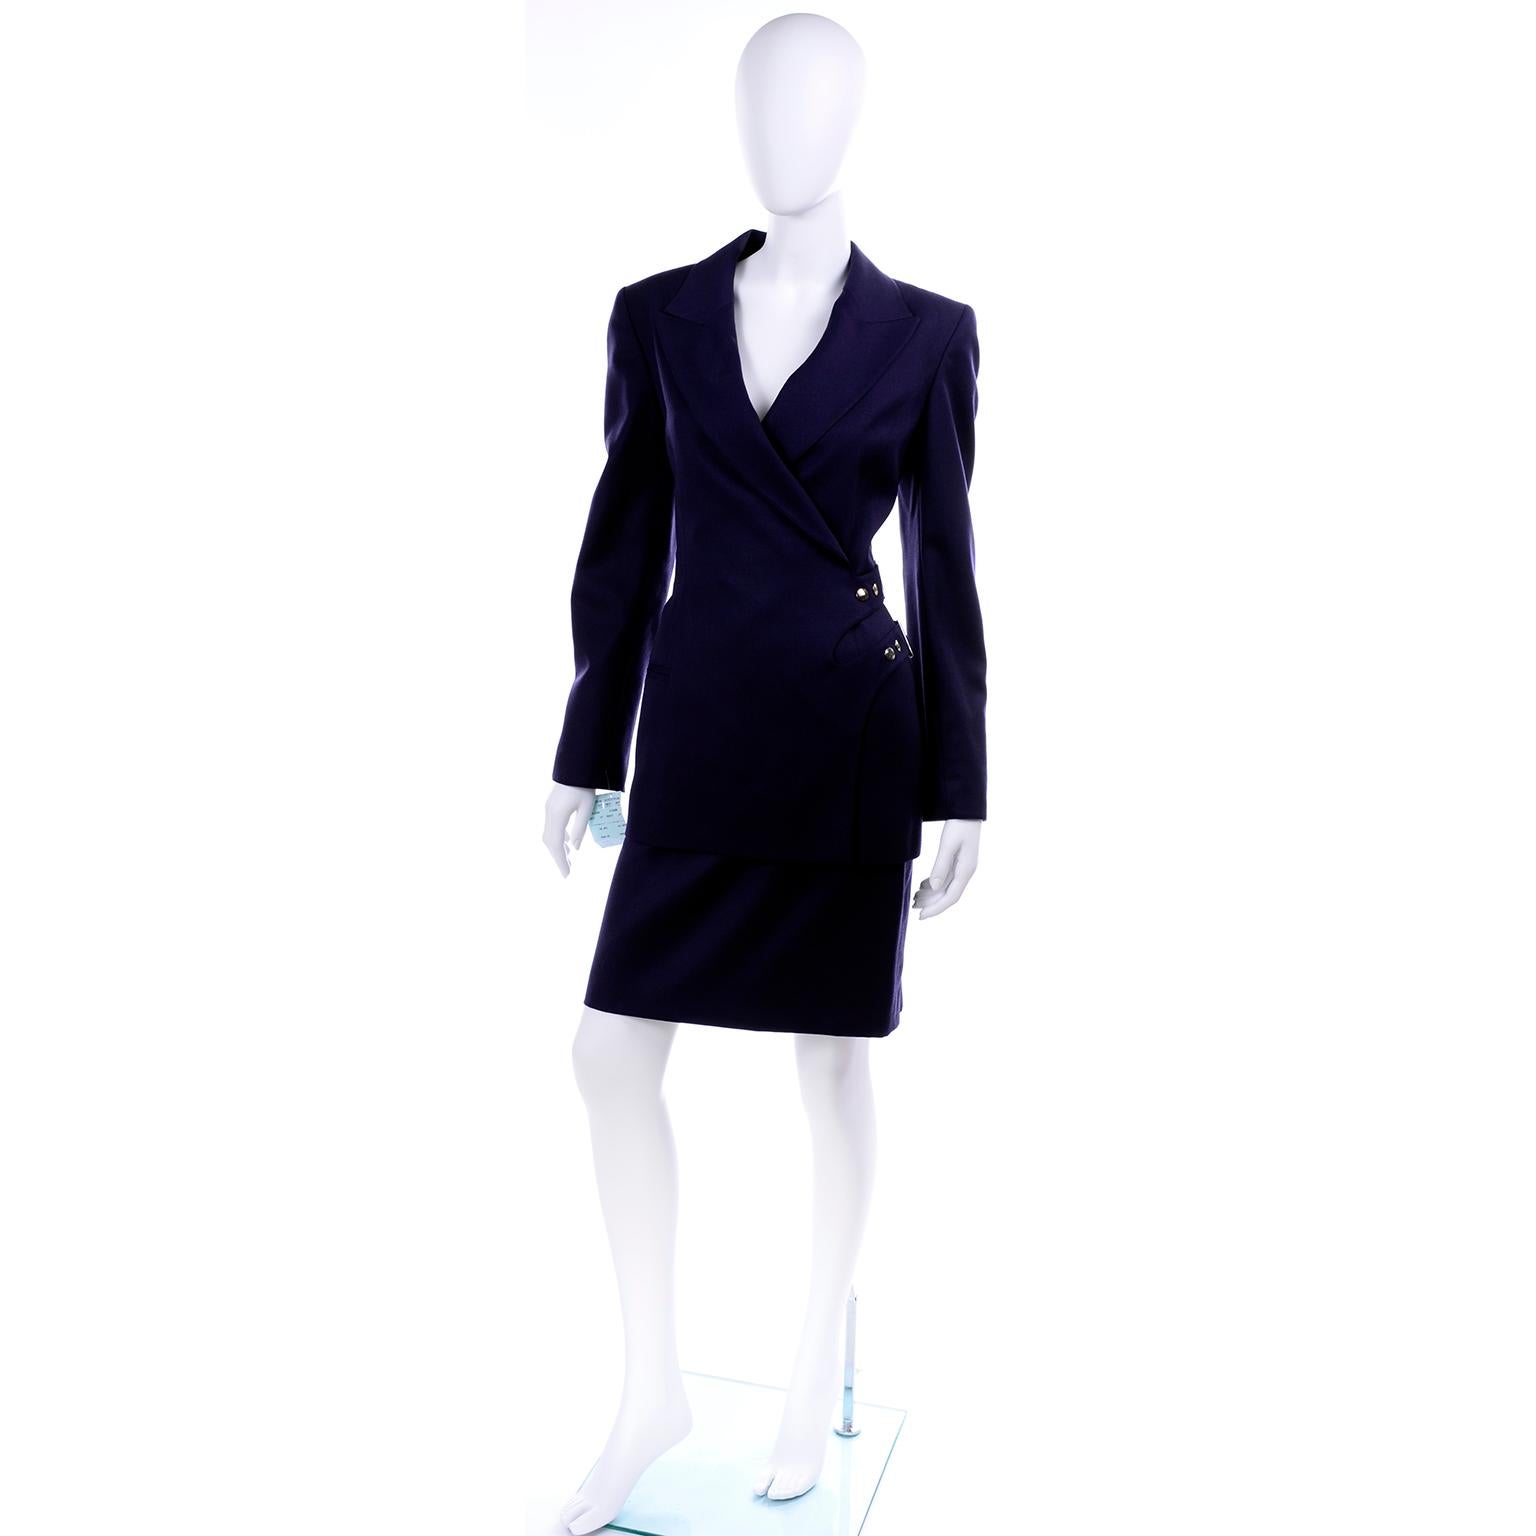 This is a vintage 1990's Claude Montana Paris navy blue wool skirt suit that still has its original tags attached and was never worn! This deadstock outfit includes a slim skirt and a jacket with shoulder pads and front buckles & snaps. The suit